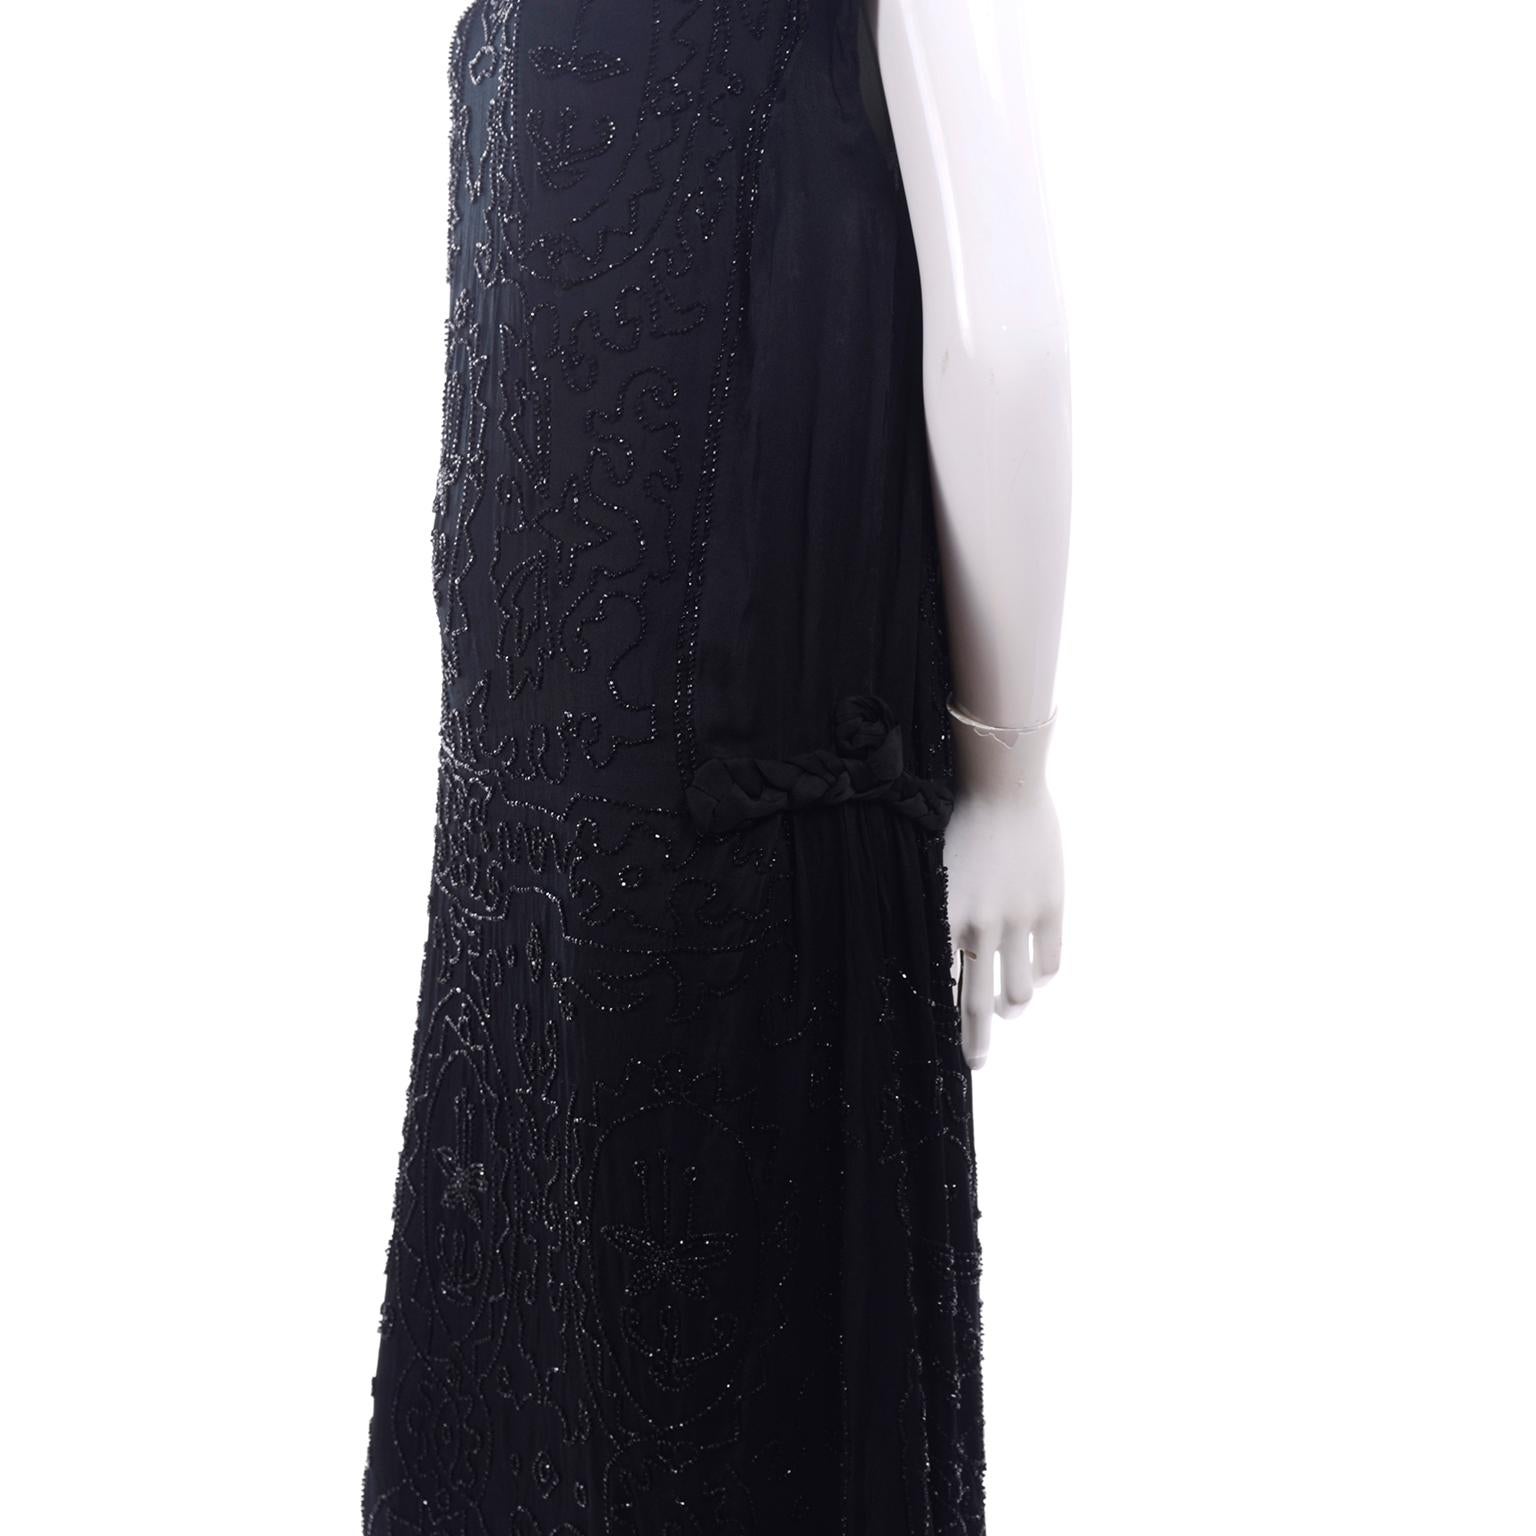 Women's Allover Beaded Black Vintage Dress With Decorative Floral Pattern, 1920s 